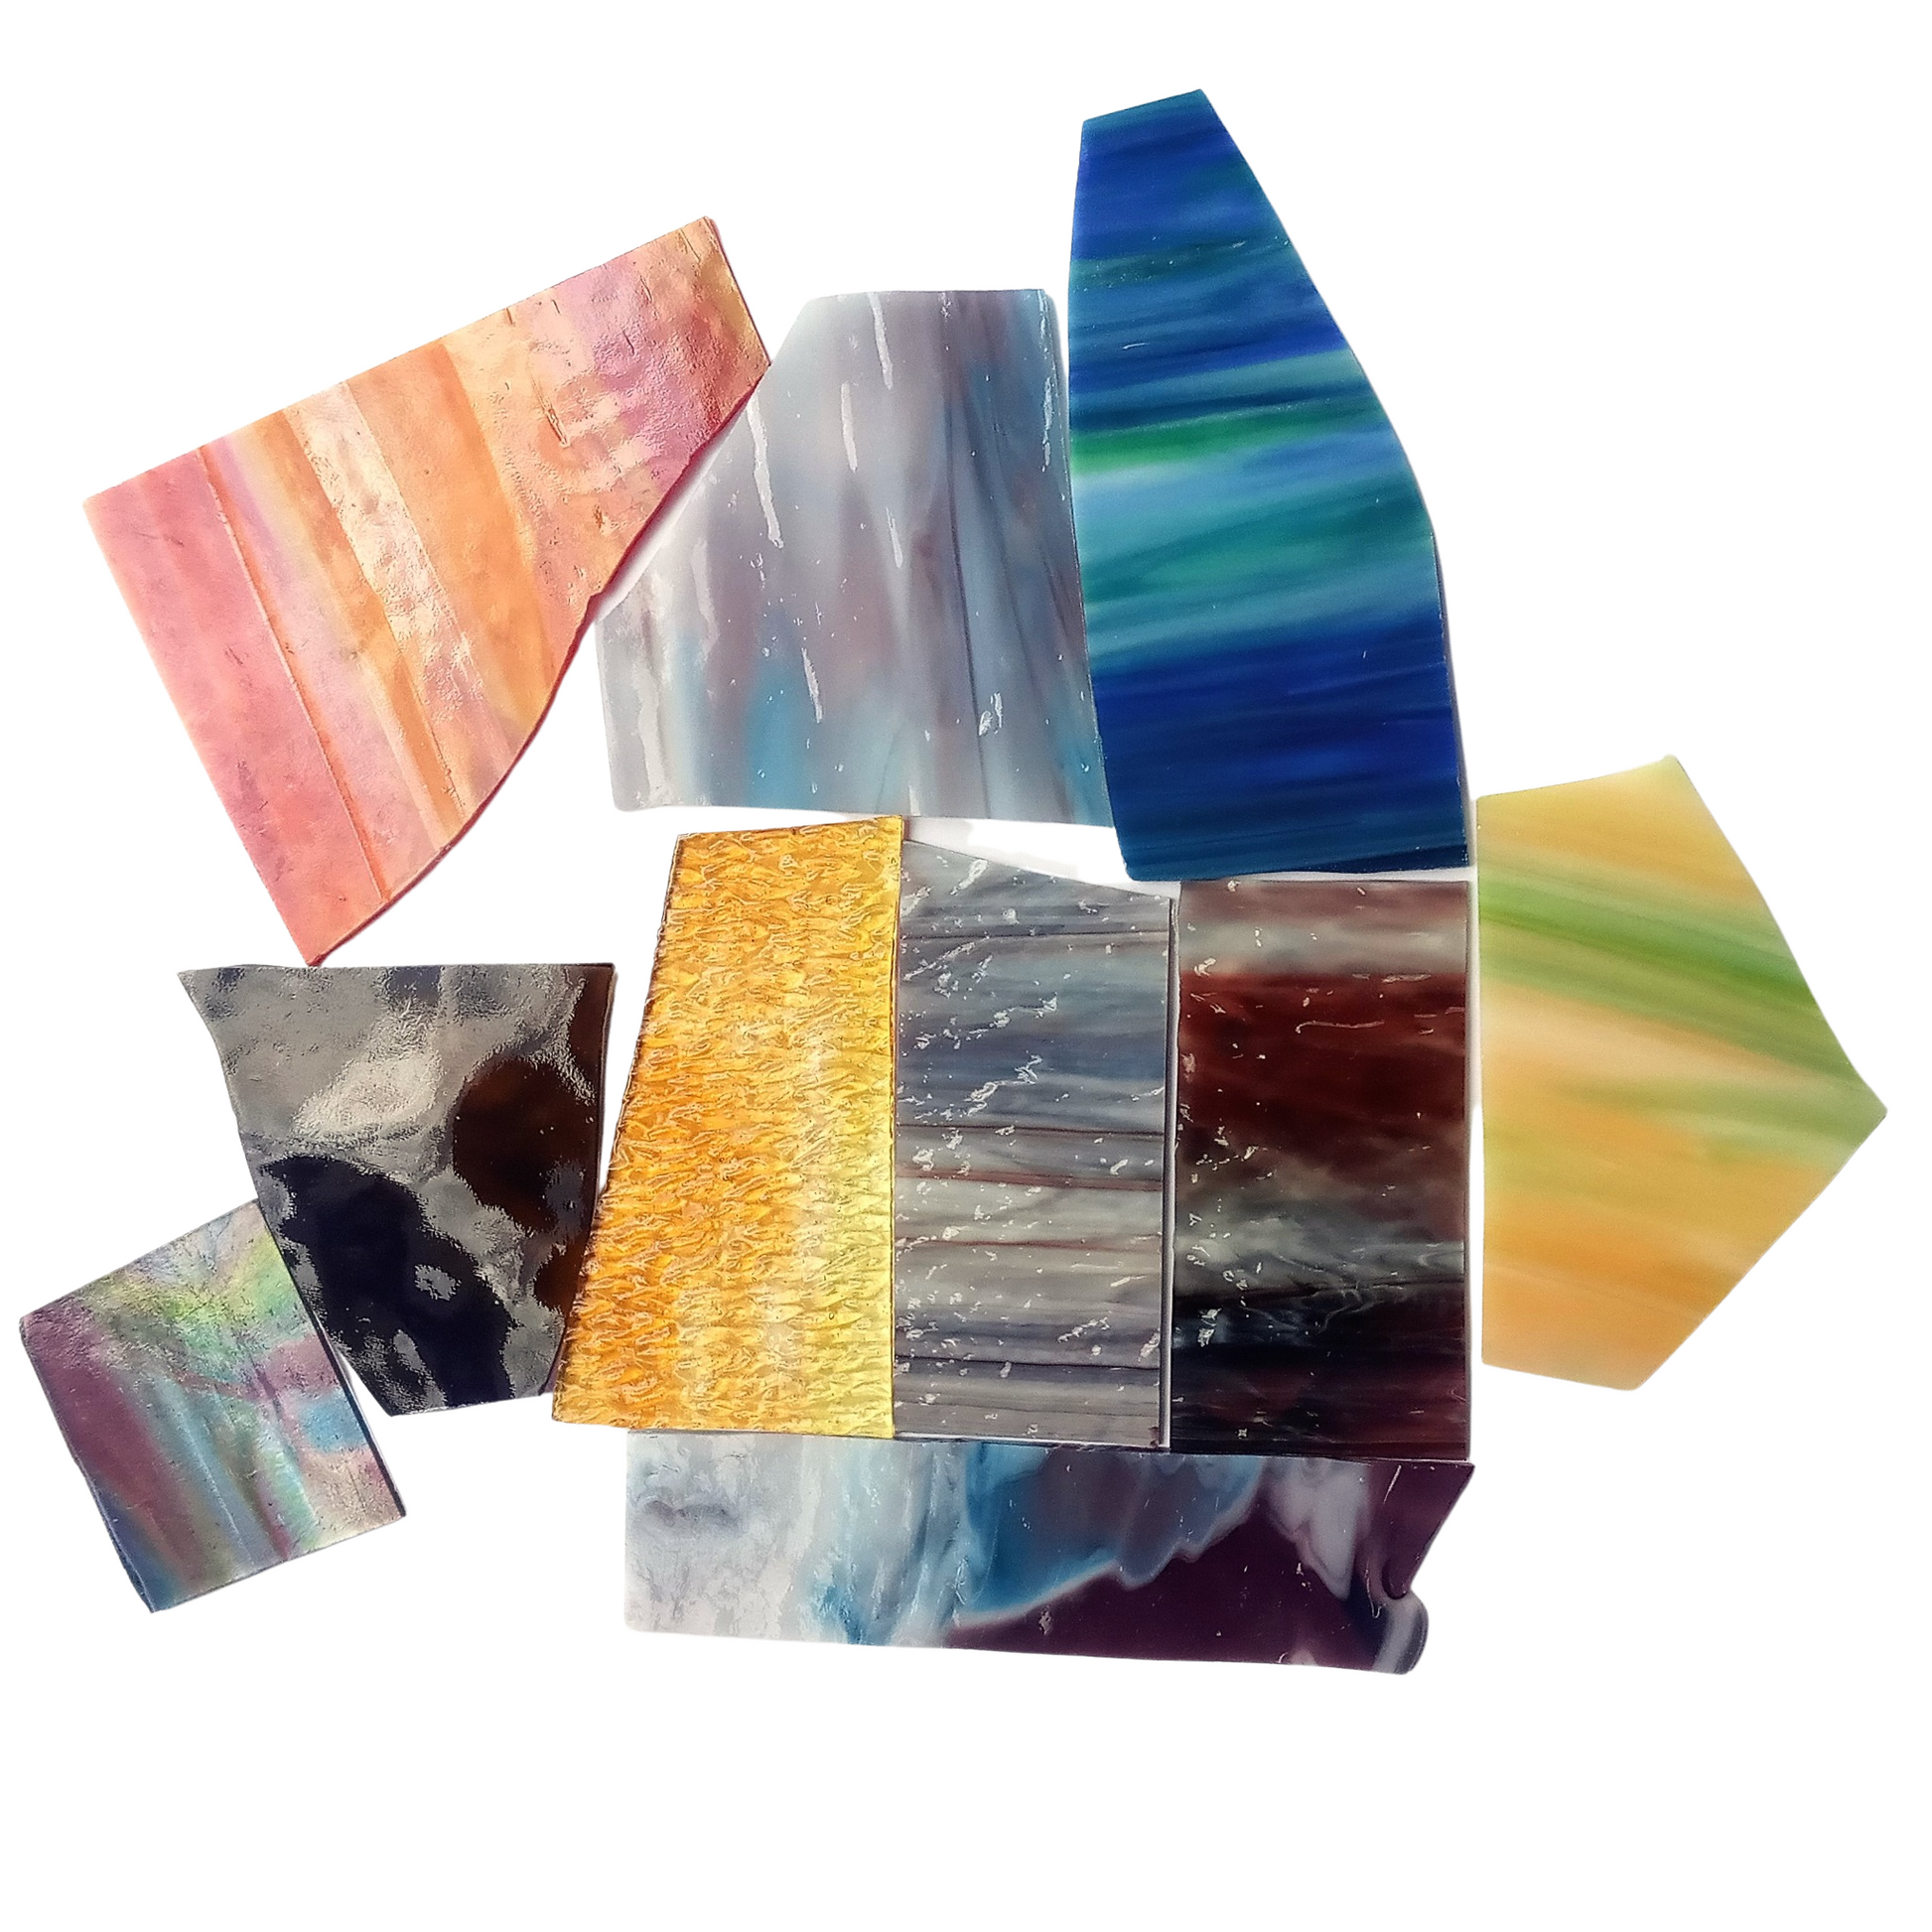 Assorted Multi-Colored Streaky, Swirled Stained Glass Scraps, Curated 1 lb Package of Reclaimed Shop Scrap Glass